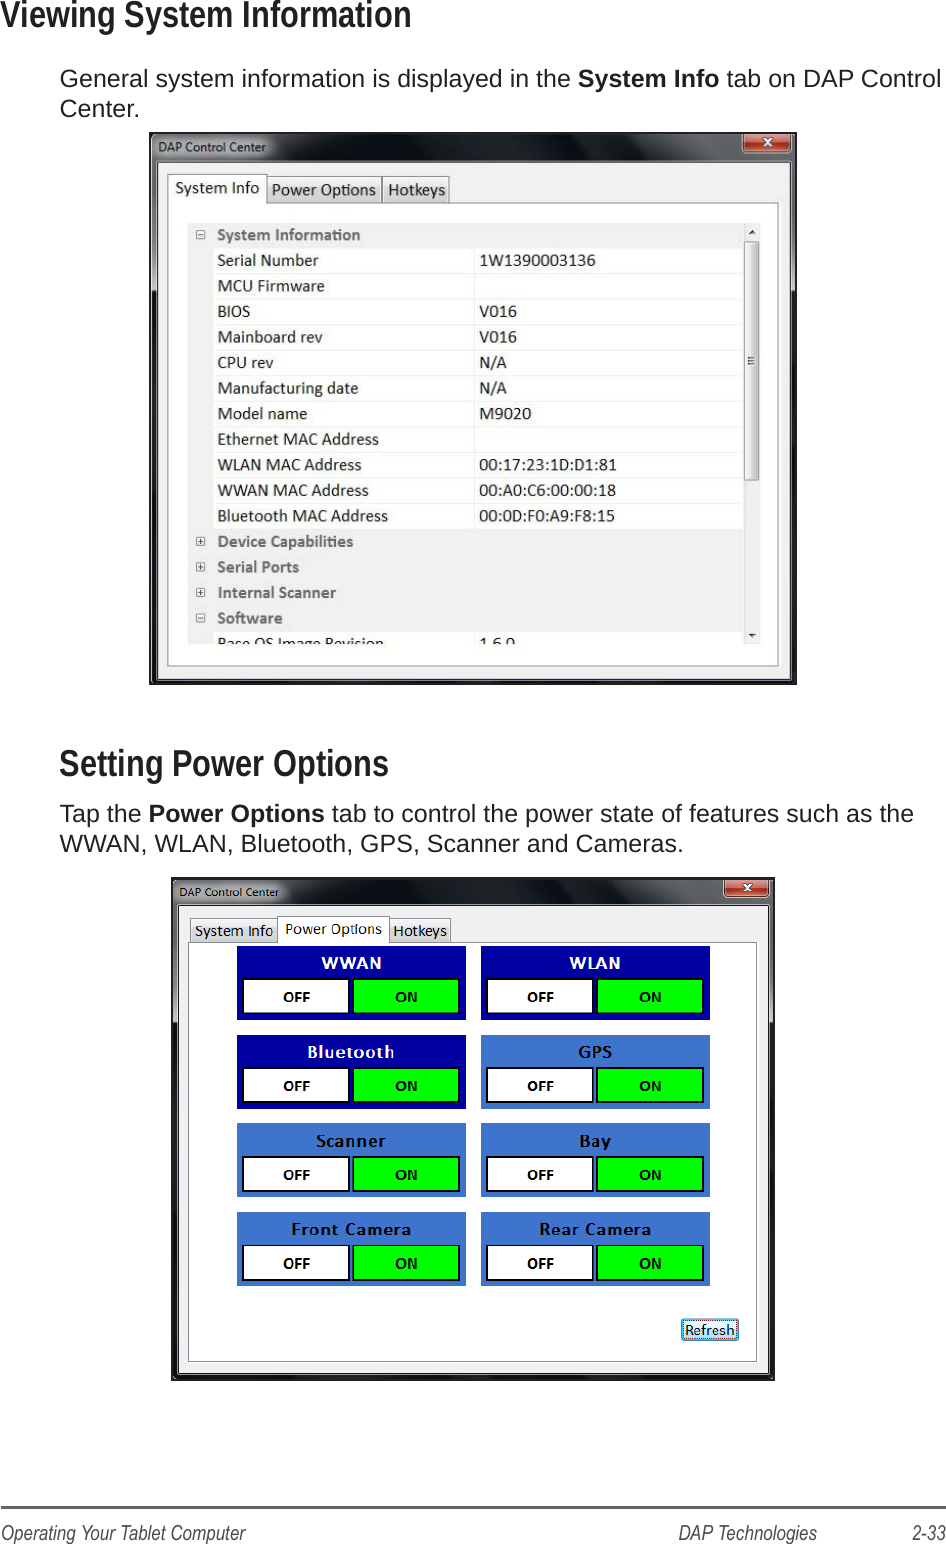 DAP Technologies                    2-33Operating Your Tablet ComputerViewing System InformationGeneral system information is displayed in the System Info tab on DAP Control Center.Setting Power OptionsTap the Power Options tab to control the power state of features such as the WWAN, WLAN, Bluetooth, GPS, Scanner and Cameras.